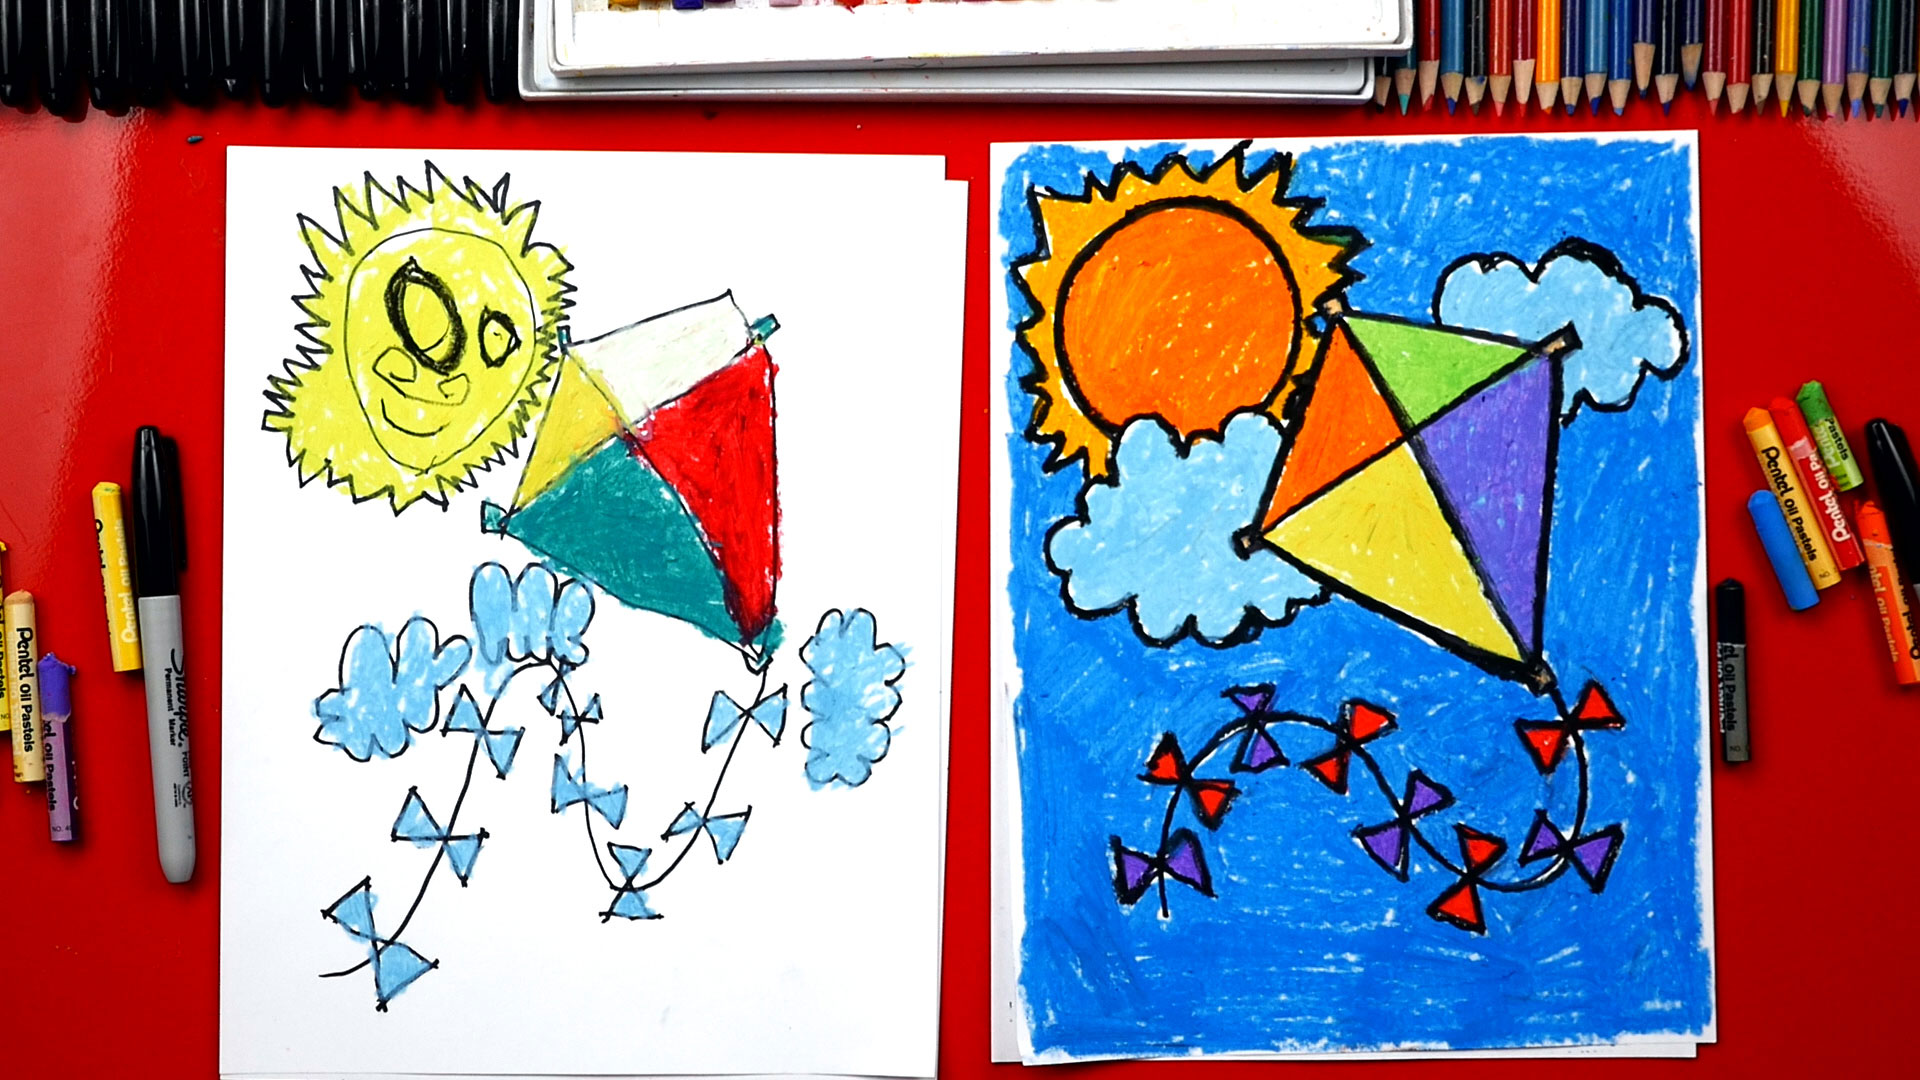 How To Draw A Kite - Art For Kids Hub